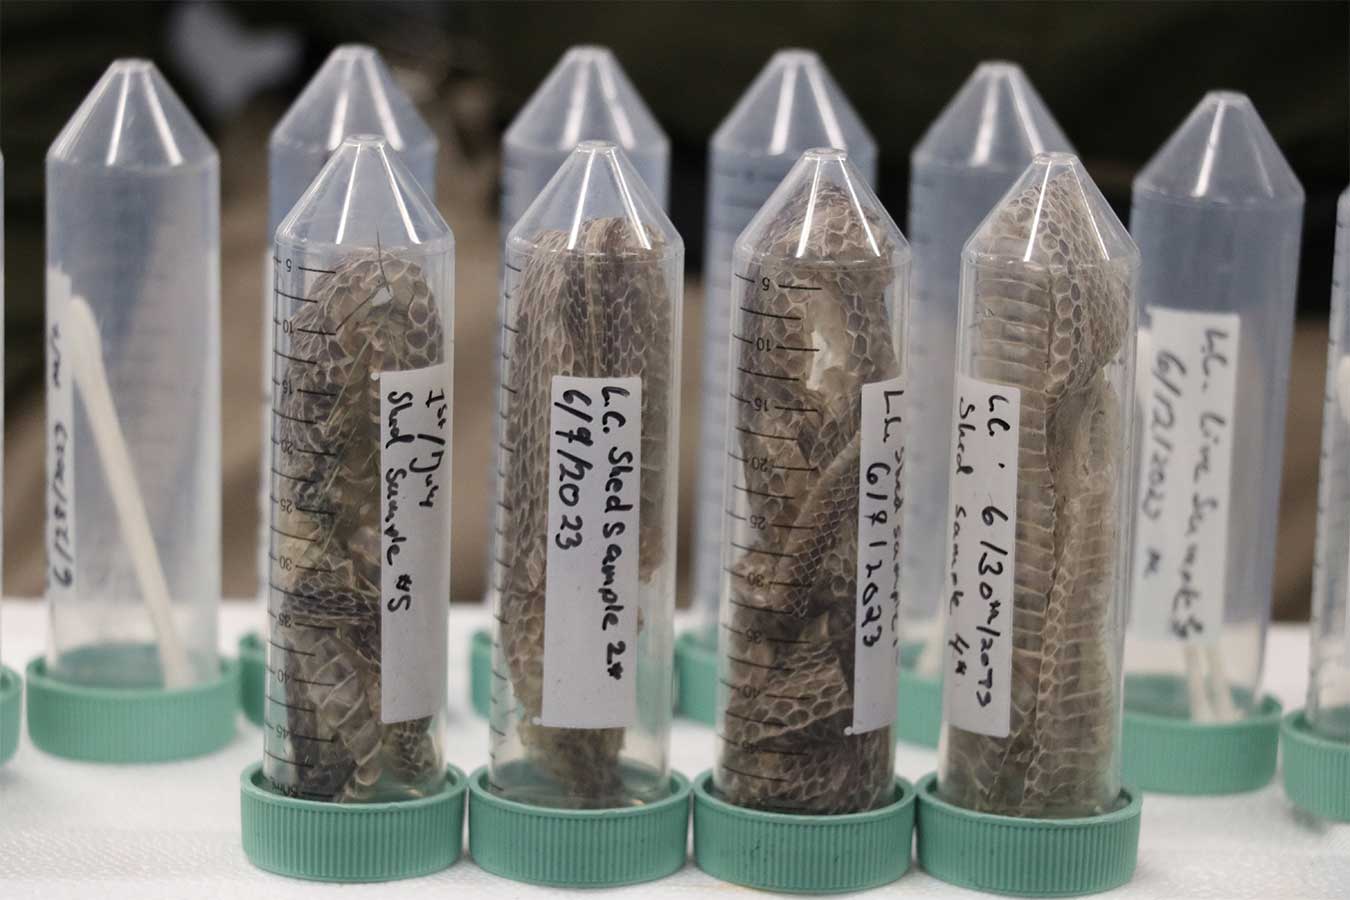 Snakeskin samples collected by DSU student Adam Peak for research.